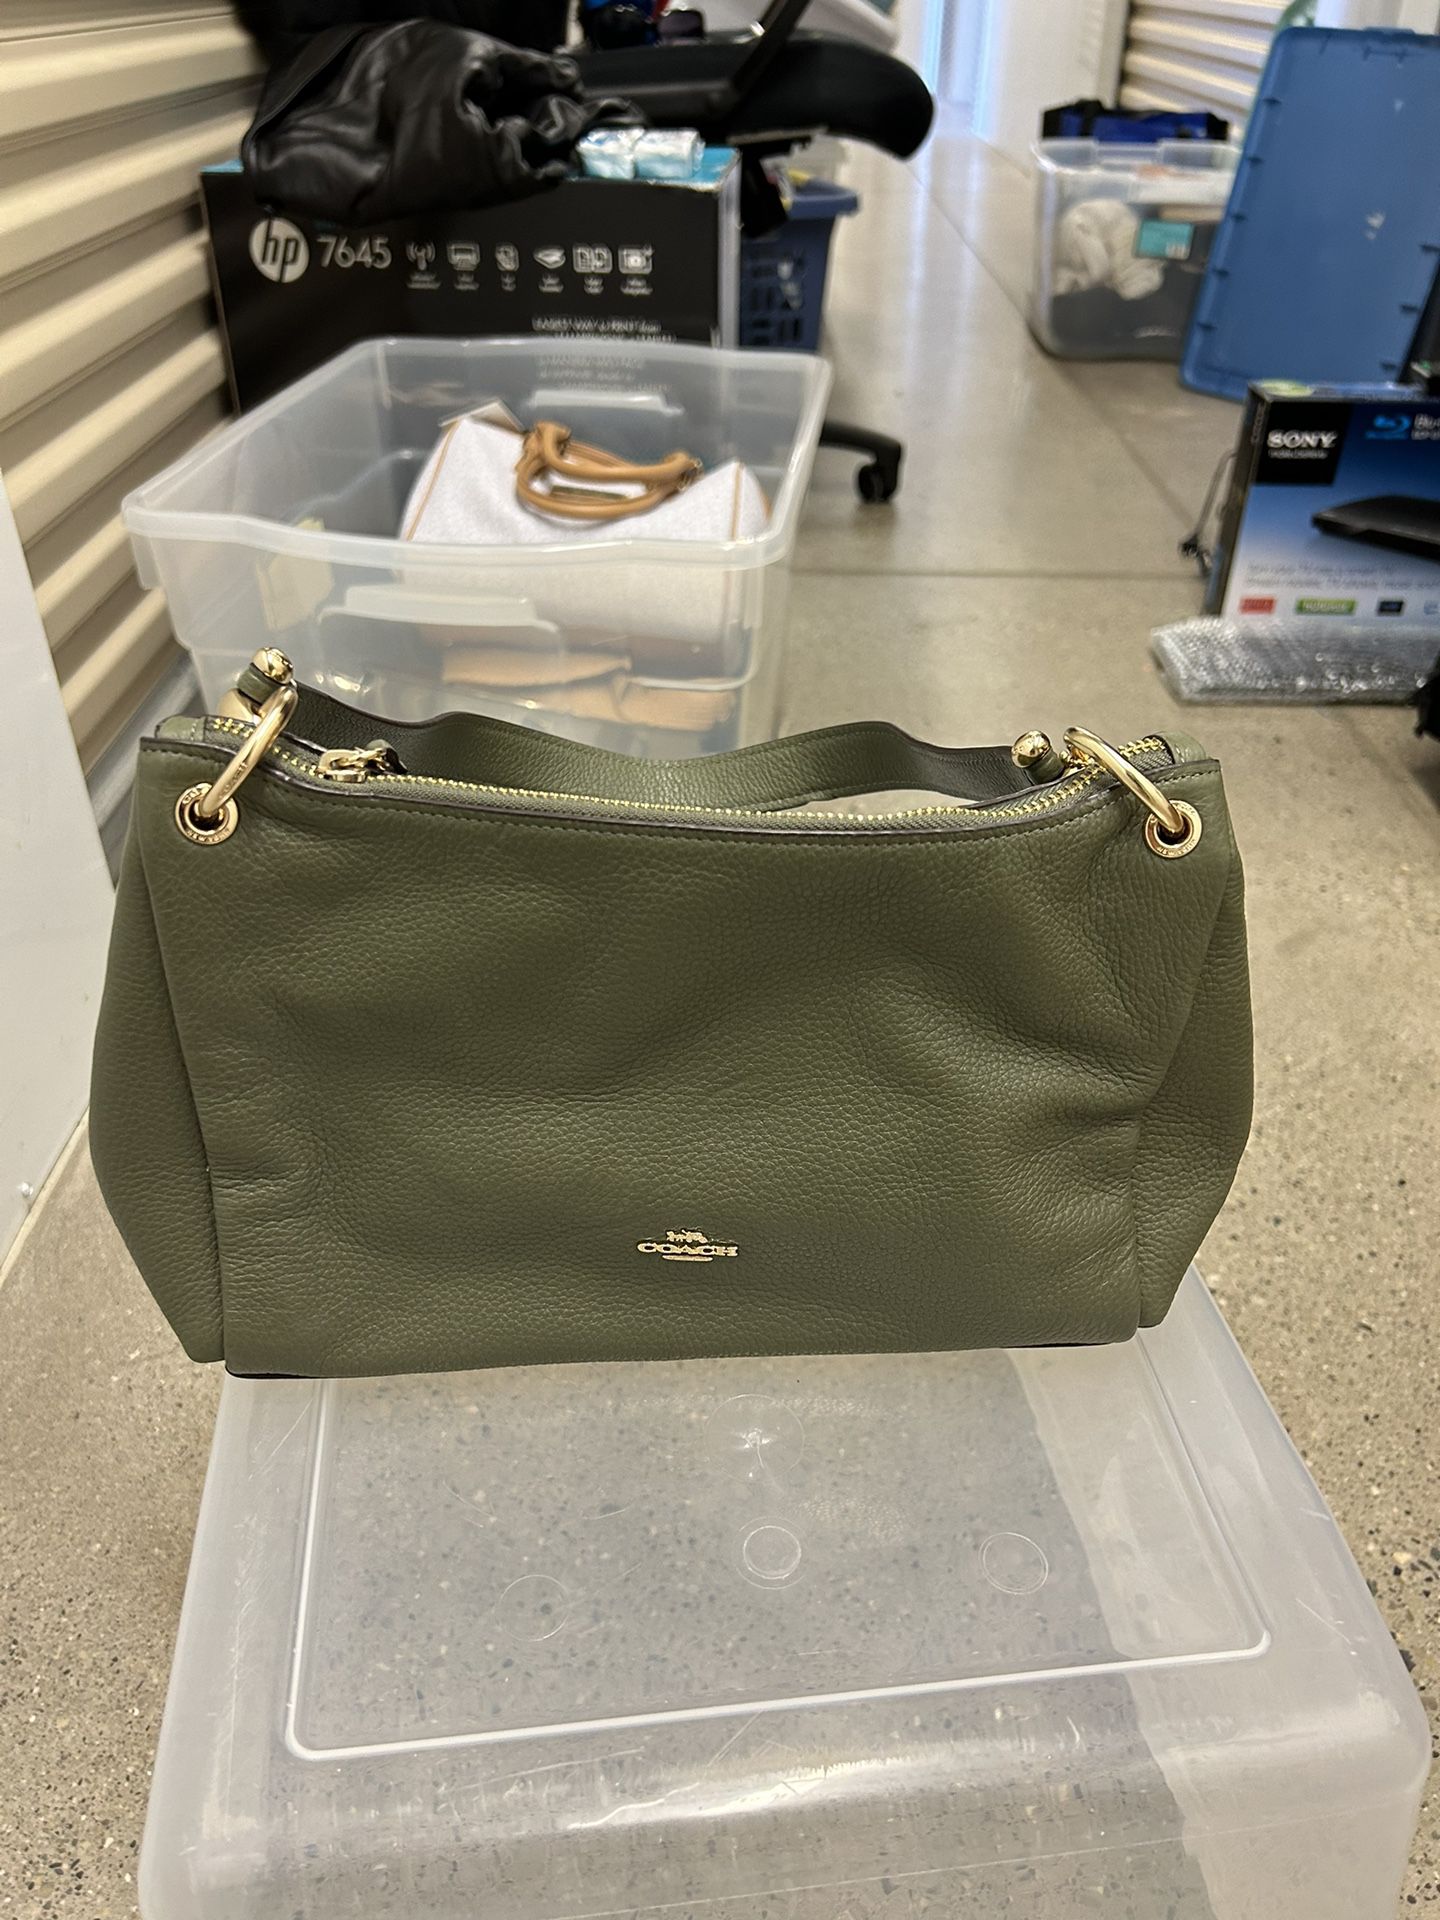 *New With Tags* Coach purse 